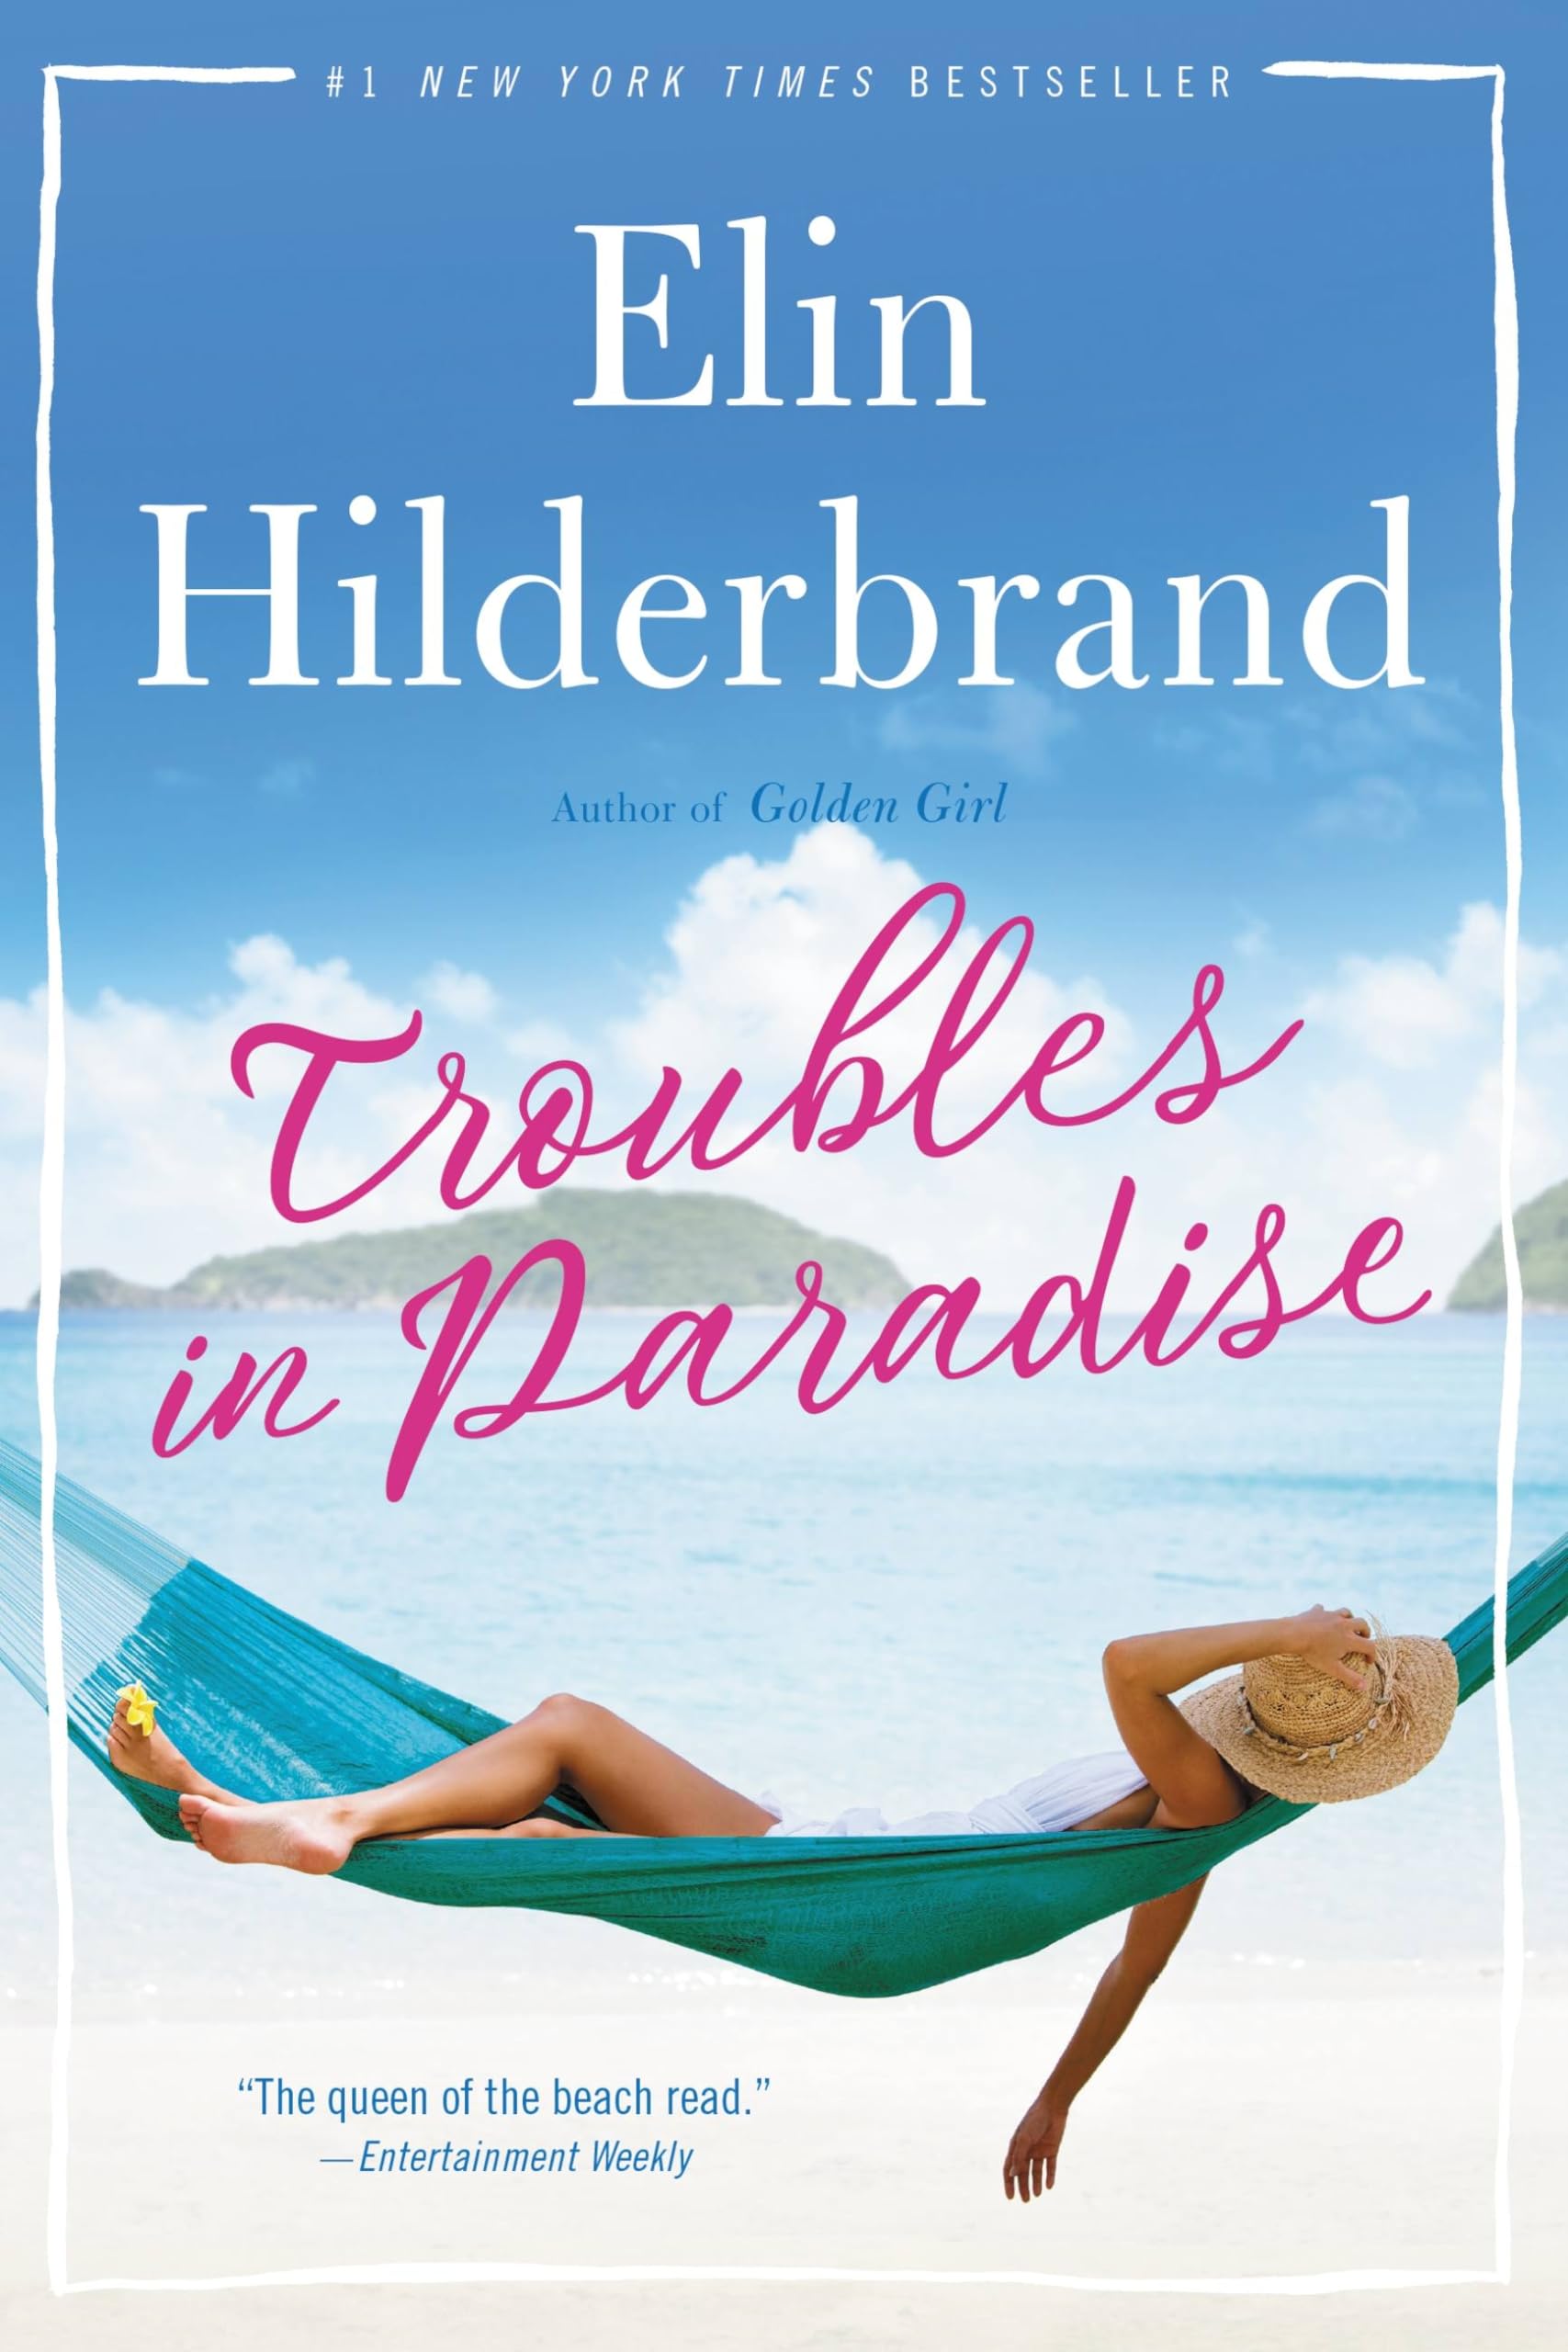 Troubles in Paradise: Volume 3 by Hilderbrand, Elin